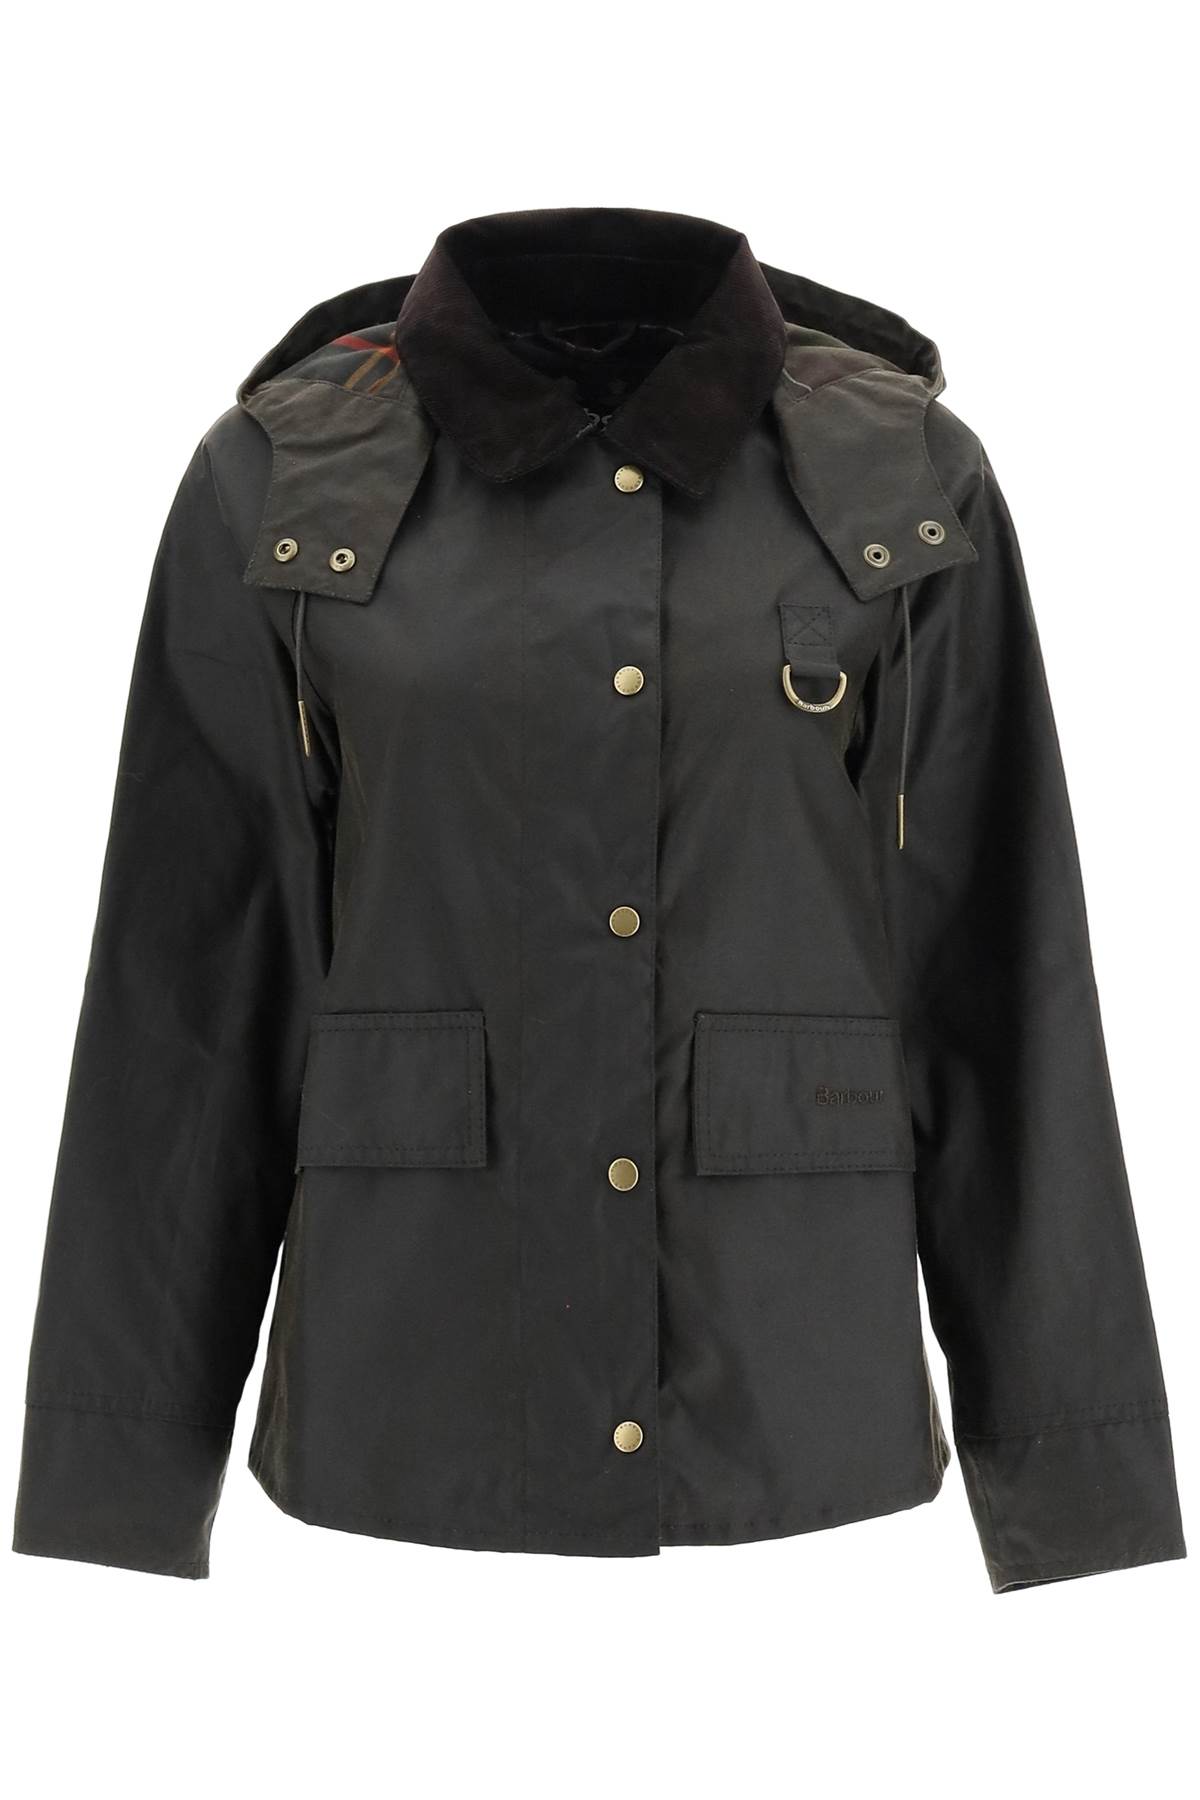 Barbour avon Wax Waxed Cotton Jacket With Detachable Hood